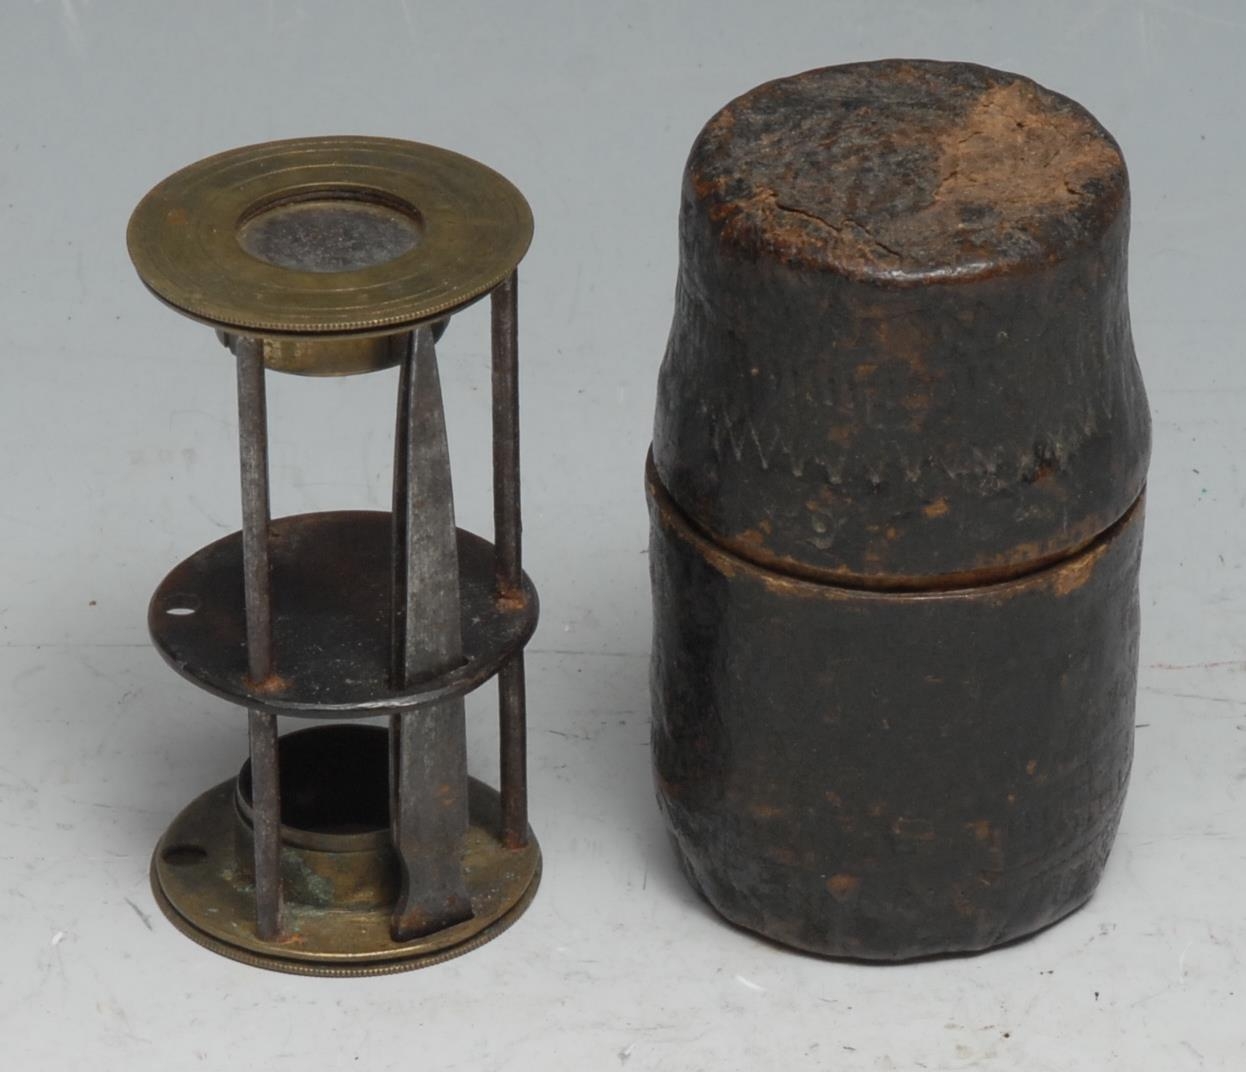 An 18th/19th century travelling pocket field microscope, tweezers ensuite, 6.5cm high, cylindrical